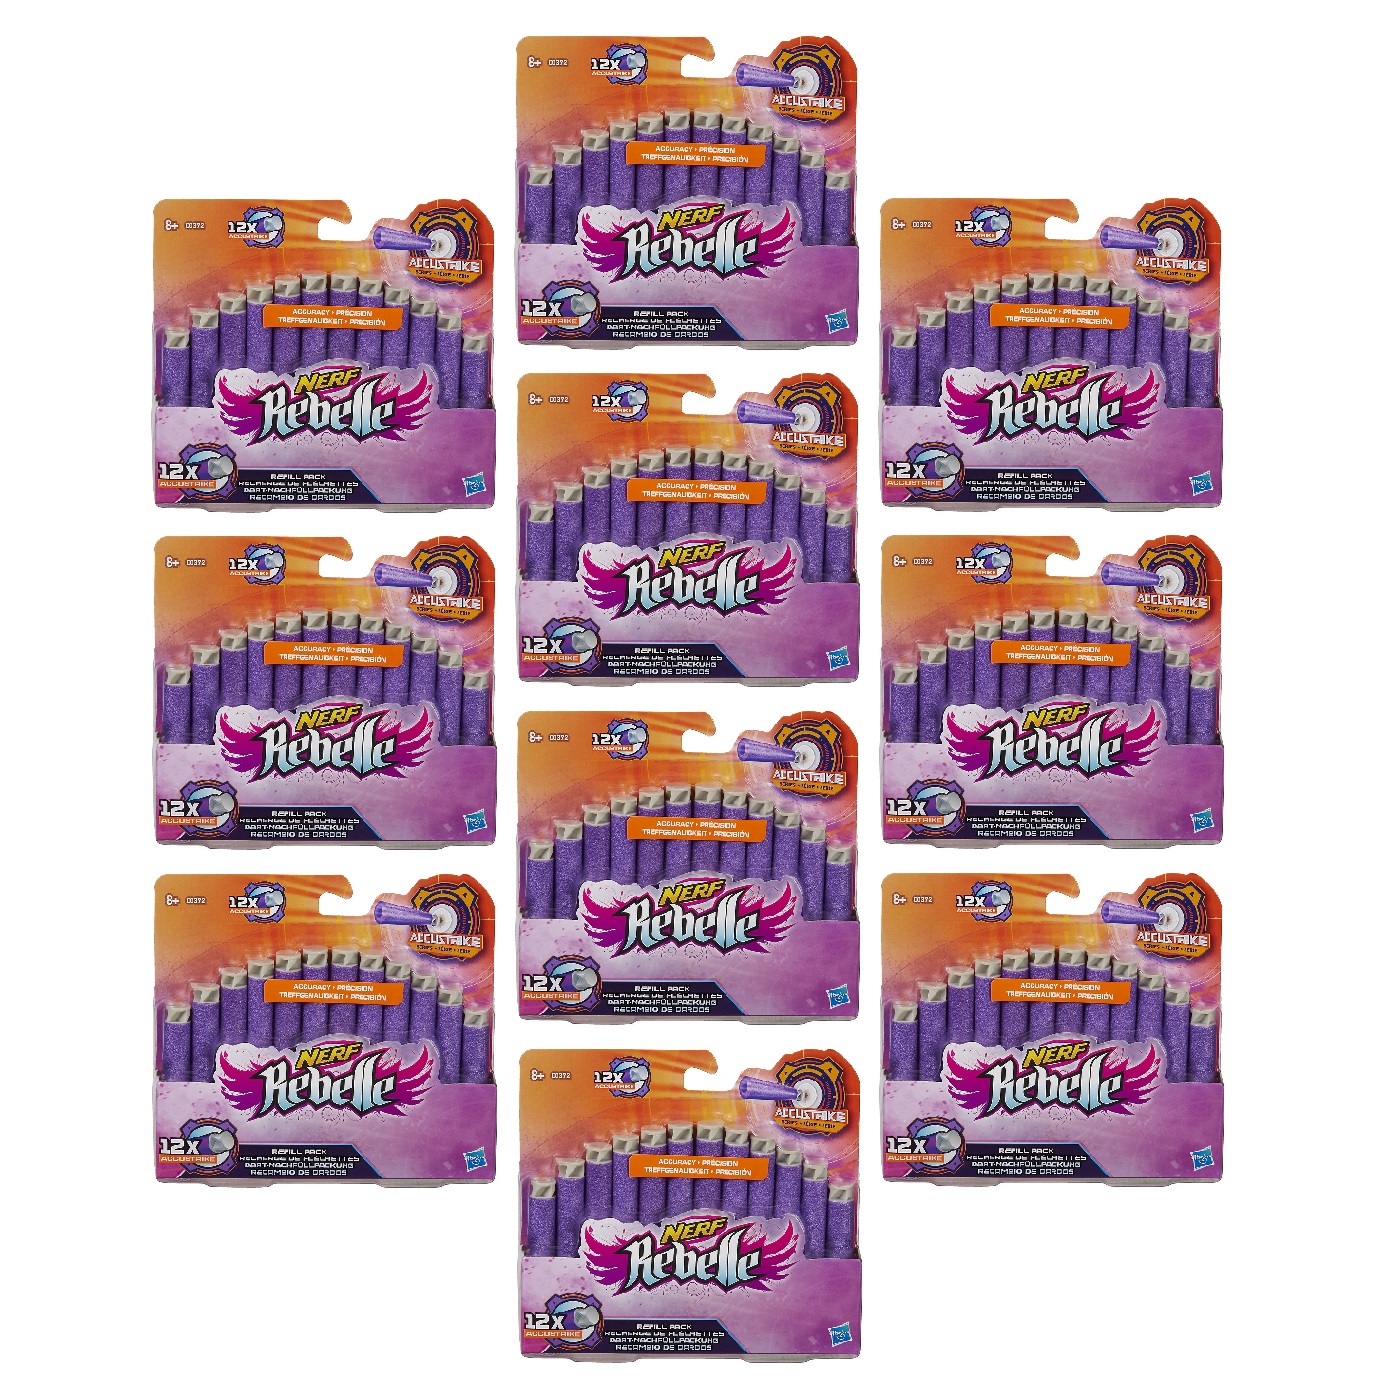 New Opened Package Details about   Hasbro Nerf Rebelle Message Dart Refill 8 Darts Model A8861 